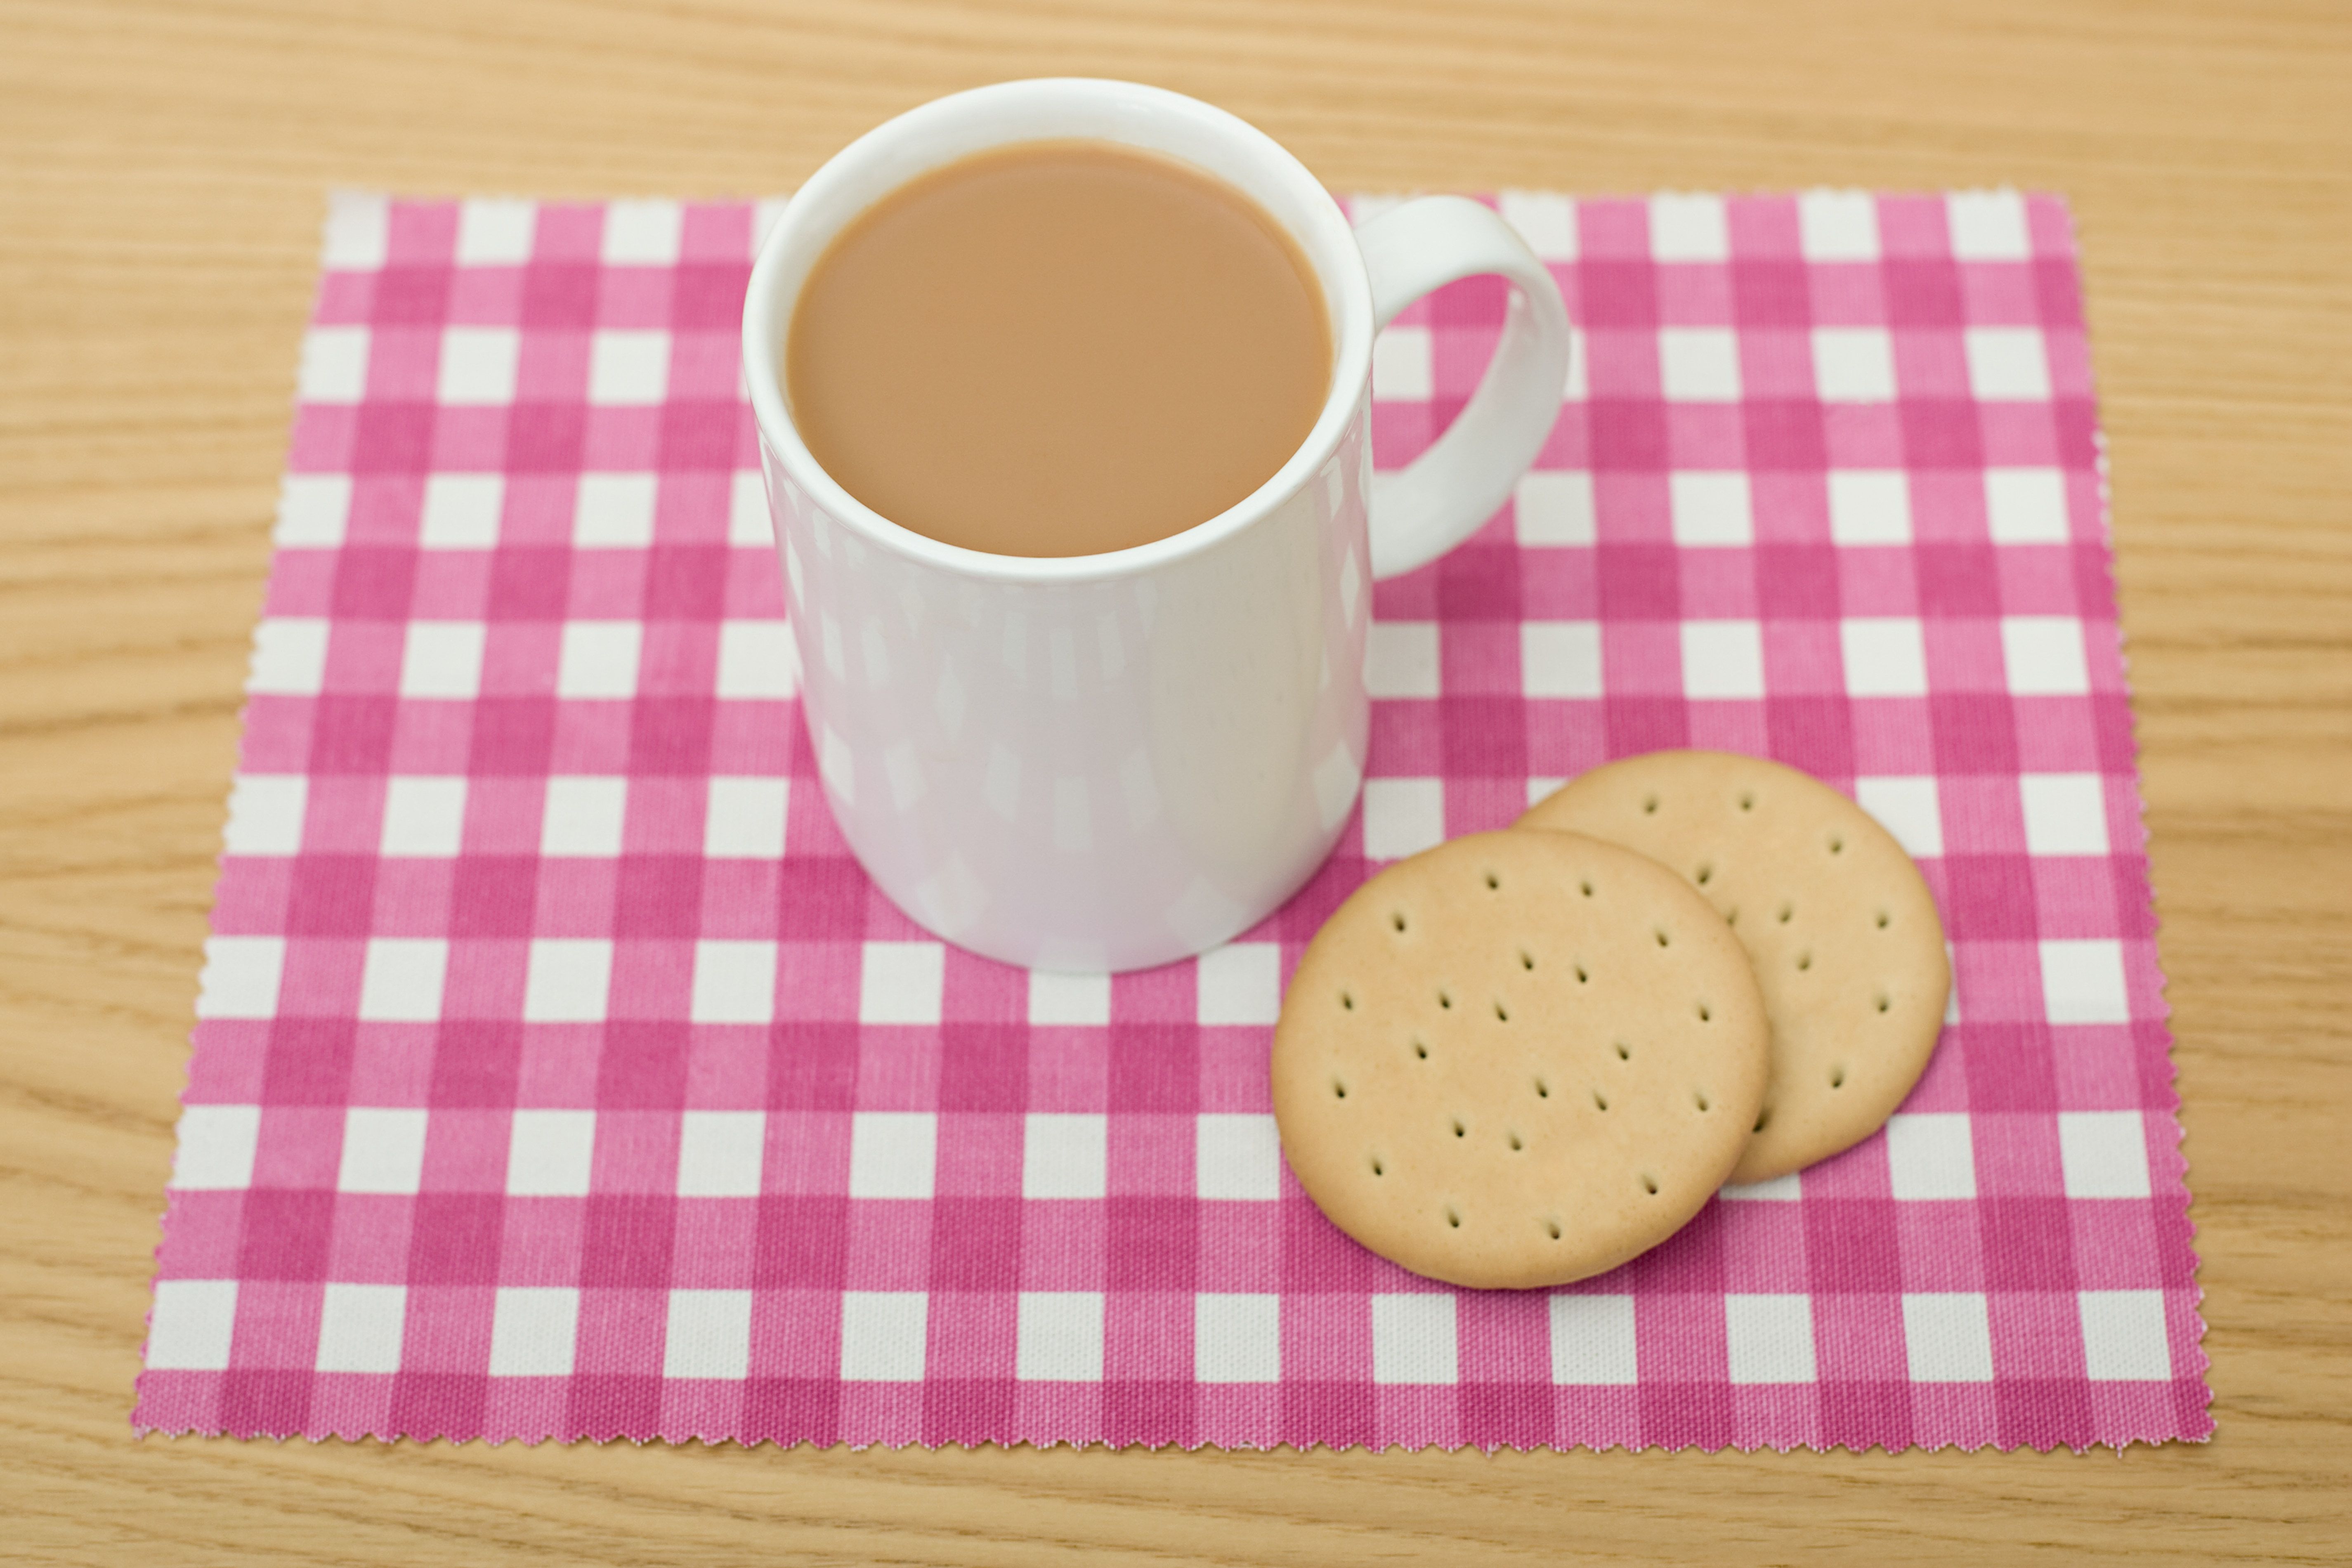 Scientists reveal how to make the perfect cup of tea - so do YOU